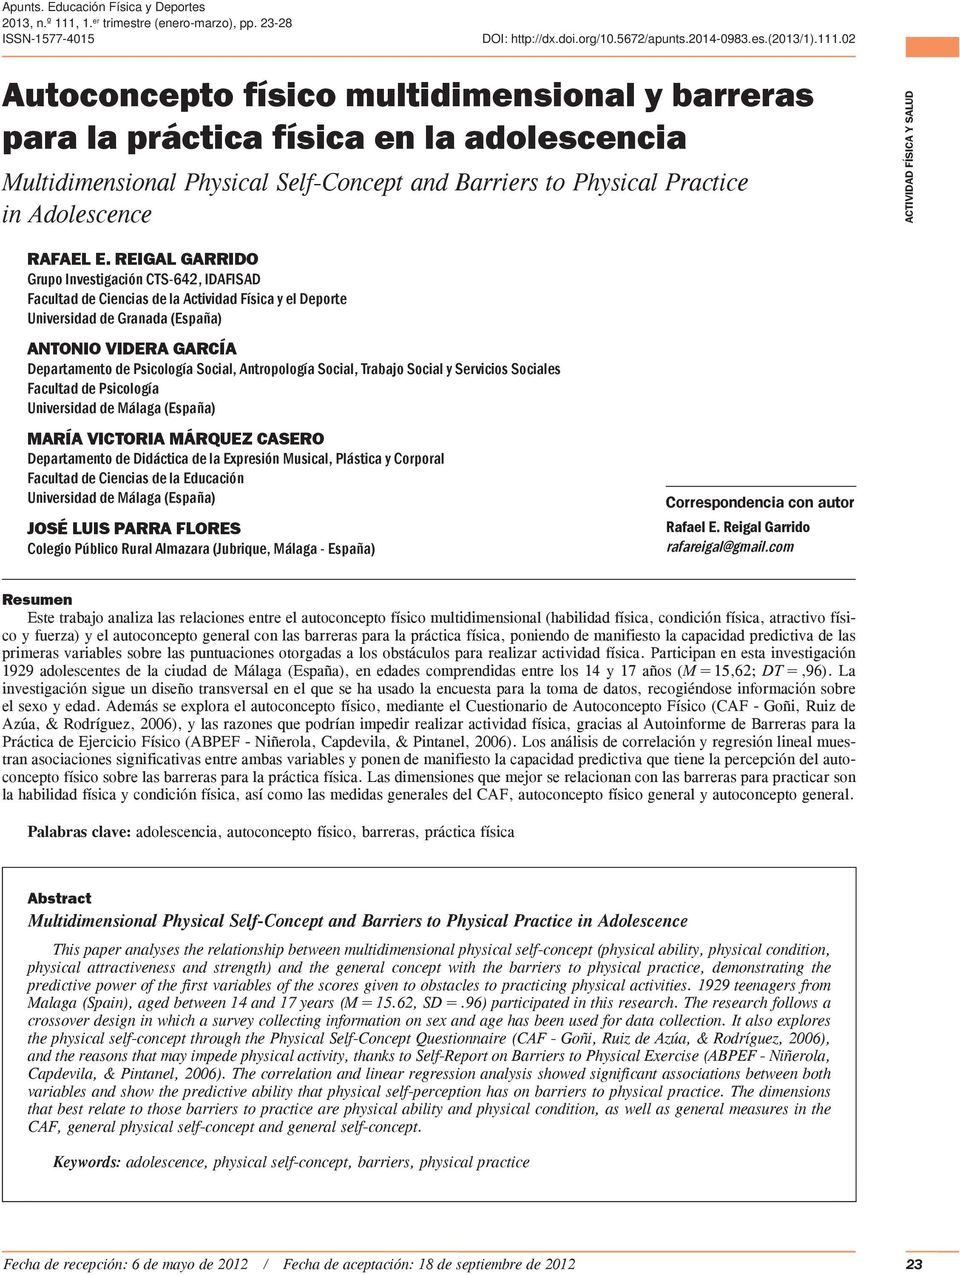 Barriers to Physical Practice in Adolescence Rafael E.